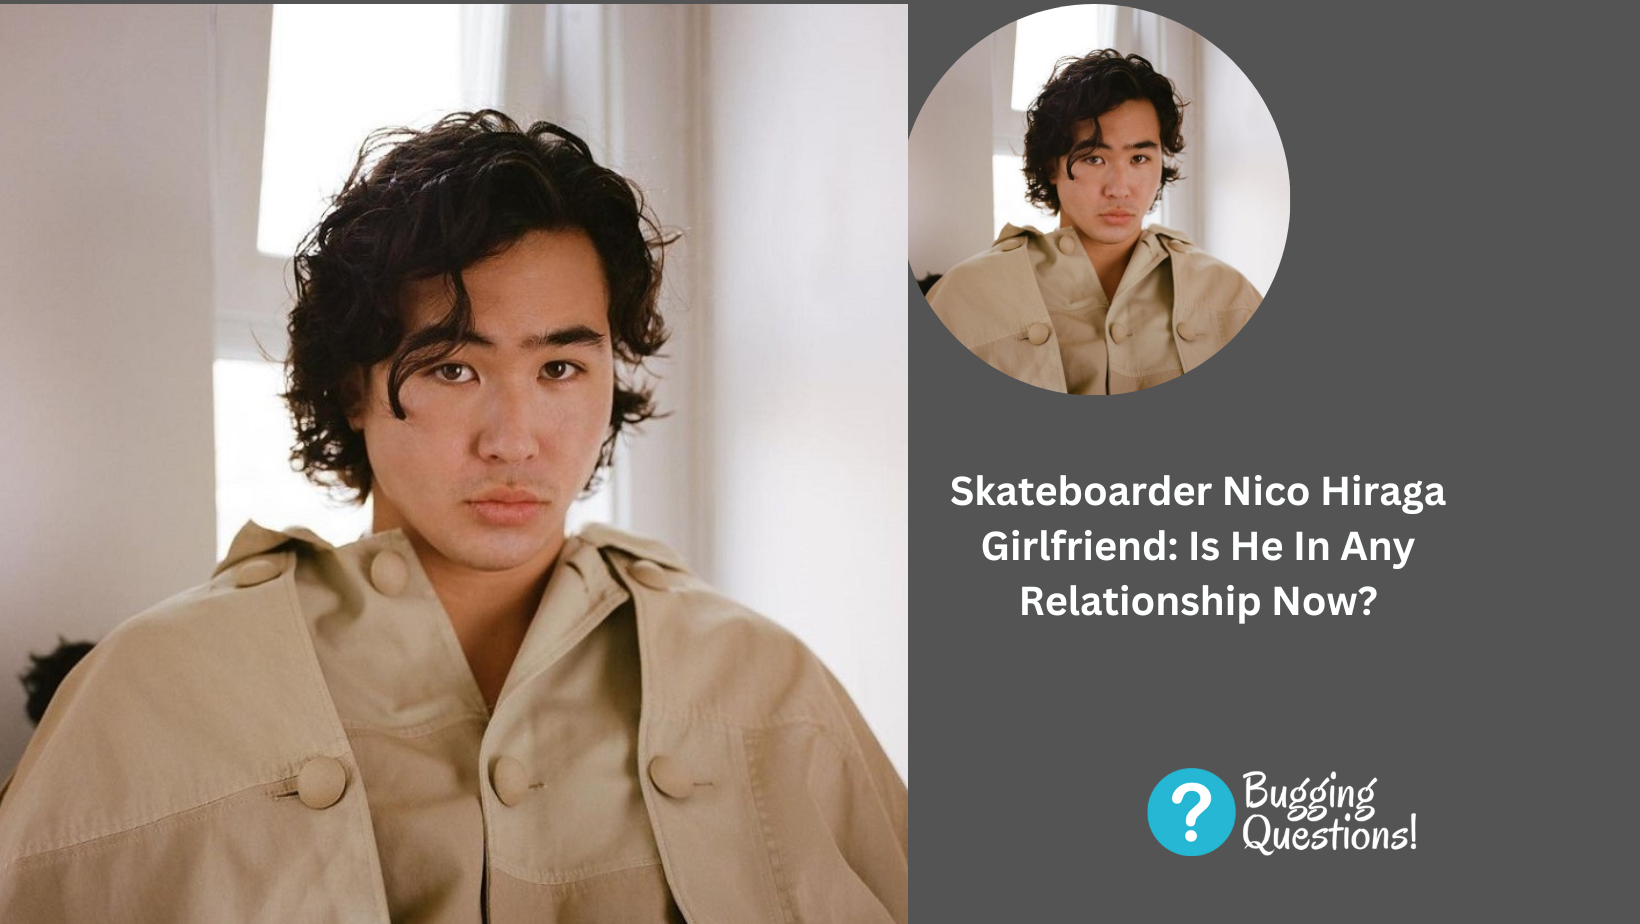 Skateboarder Nico Hiraga Girlfriend: Is He In Any Relationship Now?